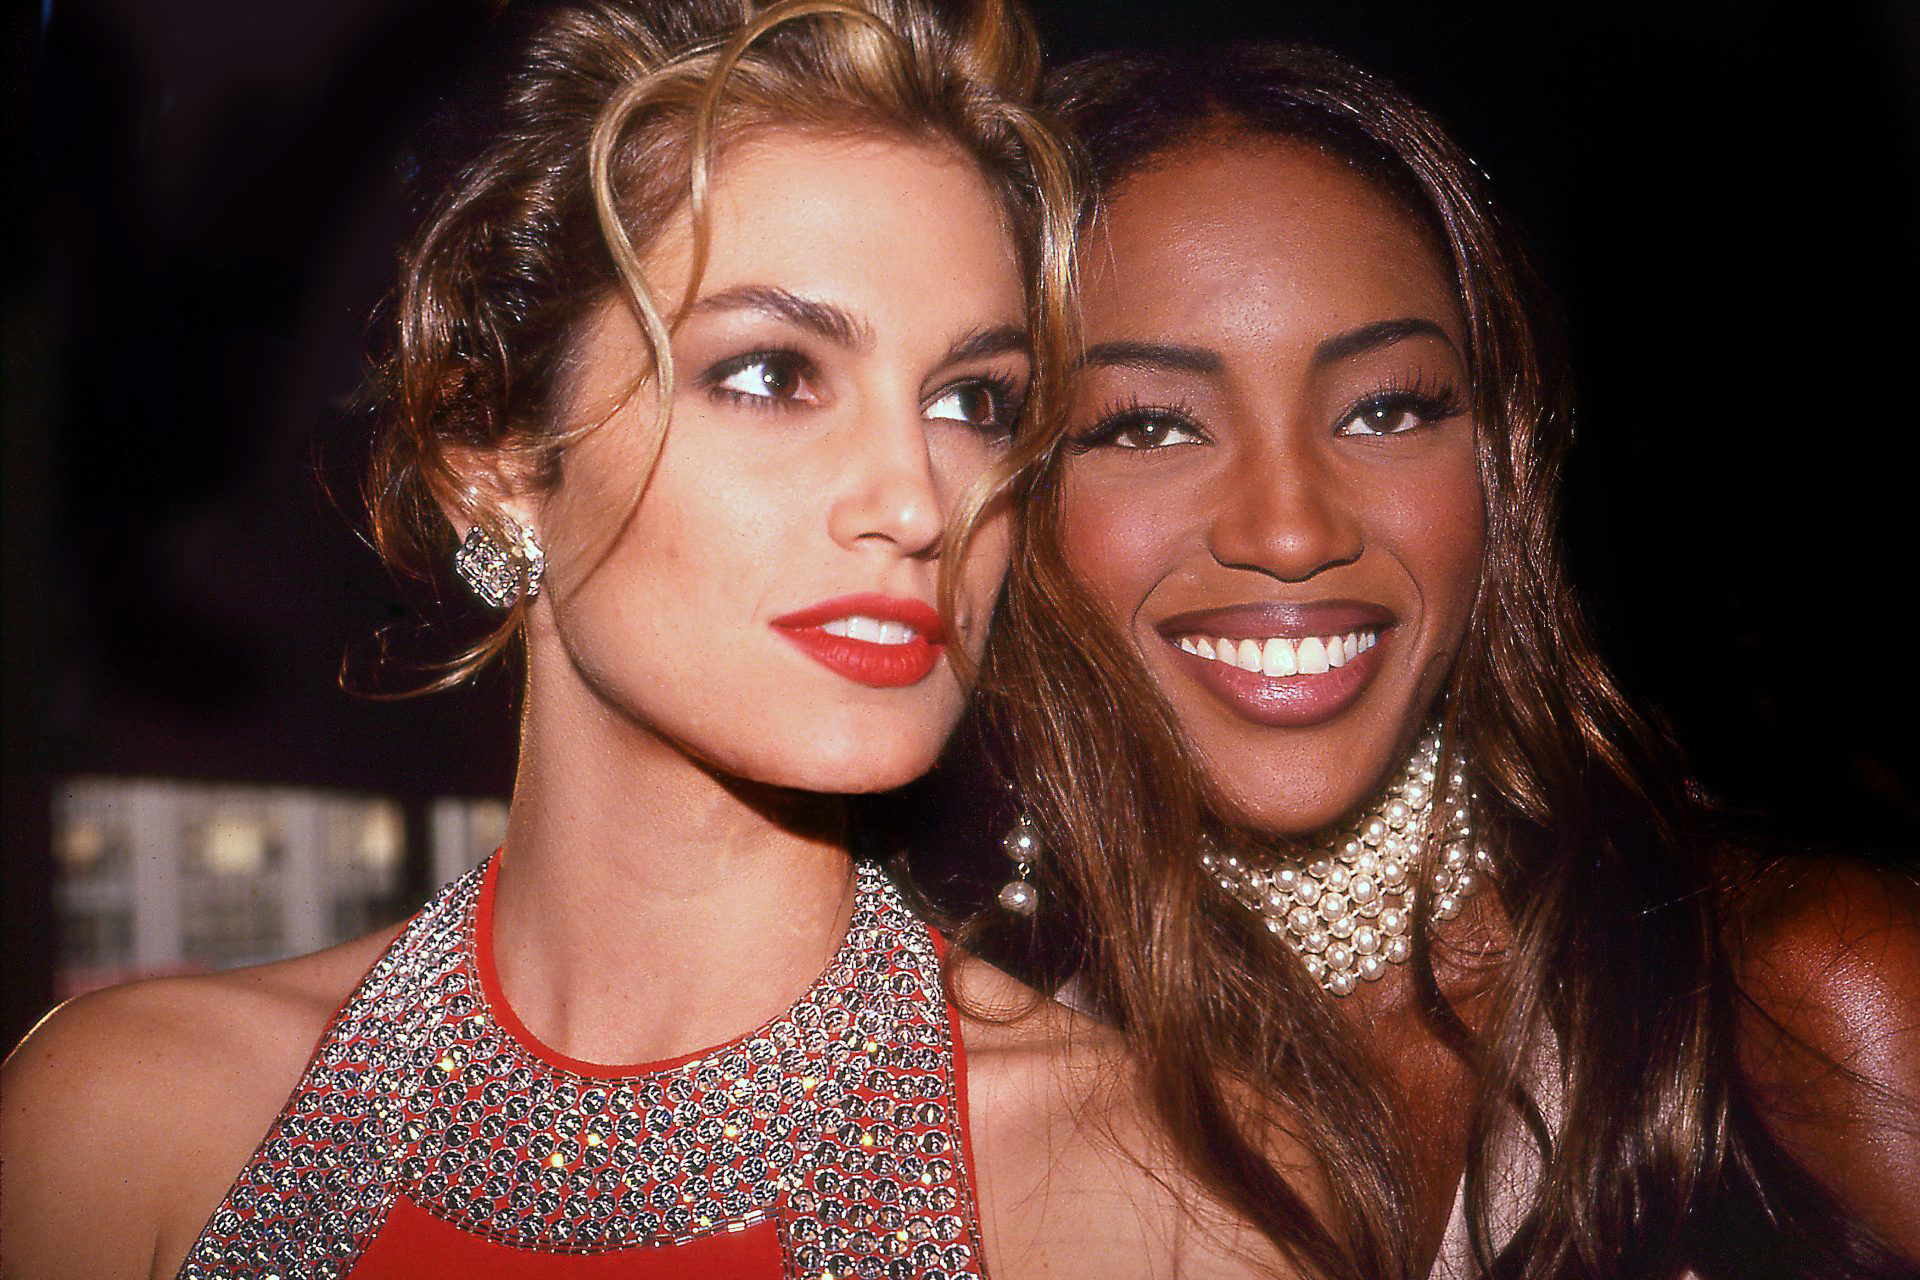 90s Supermodels: The Most Iconic Faces of the Era